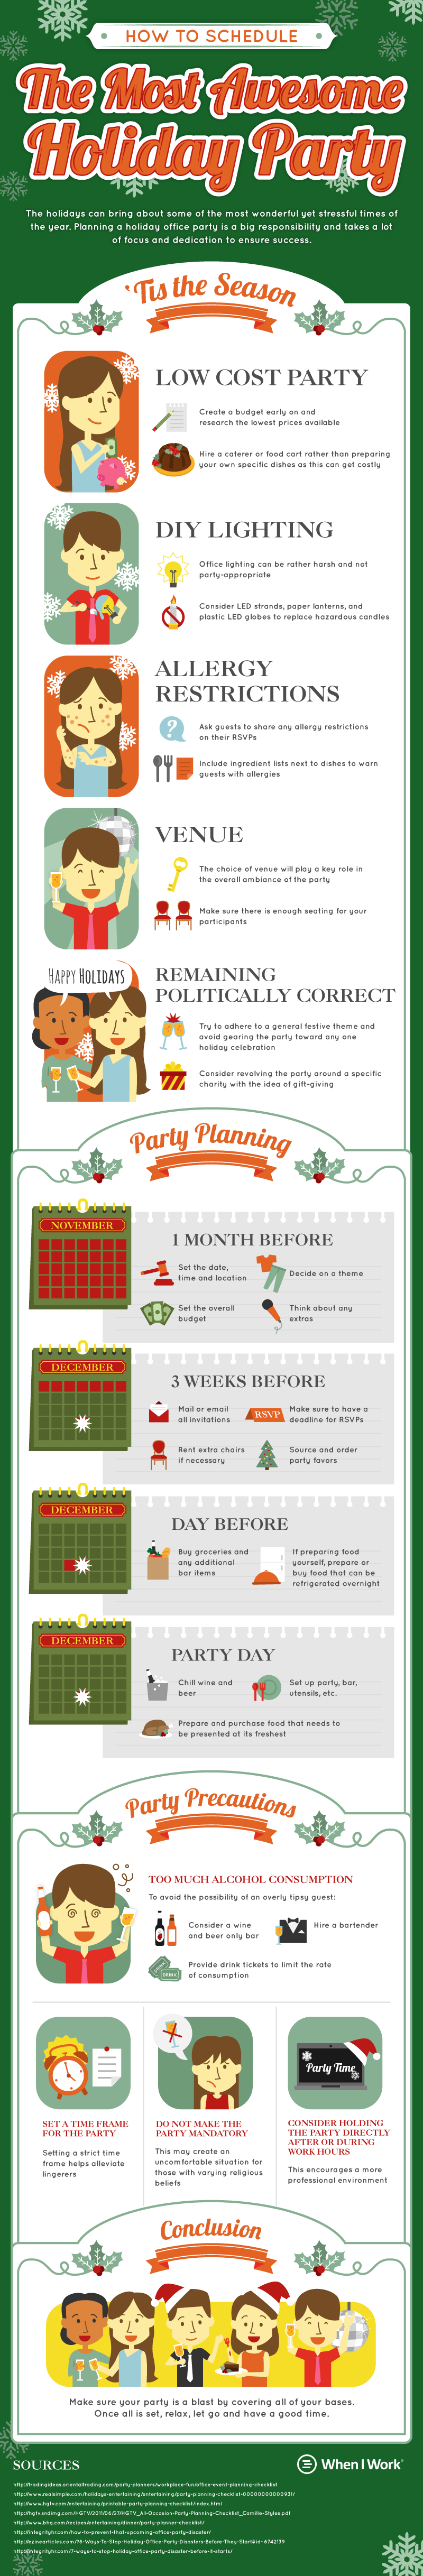 How To Schedule an Awesome Holiday Party